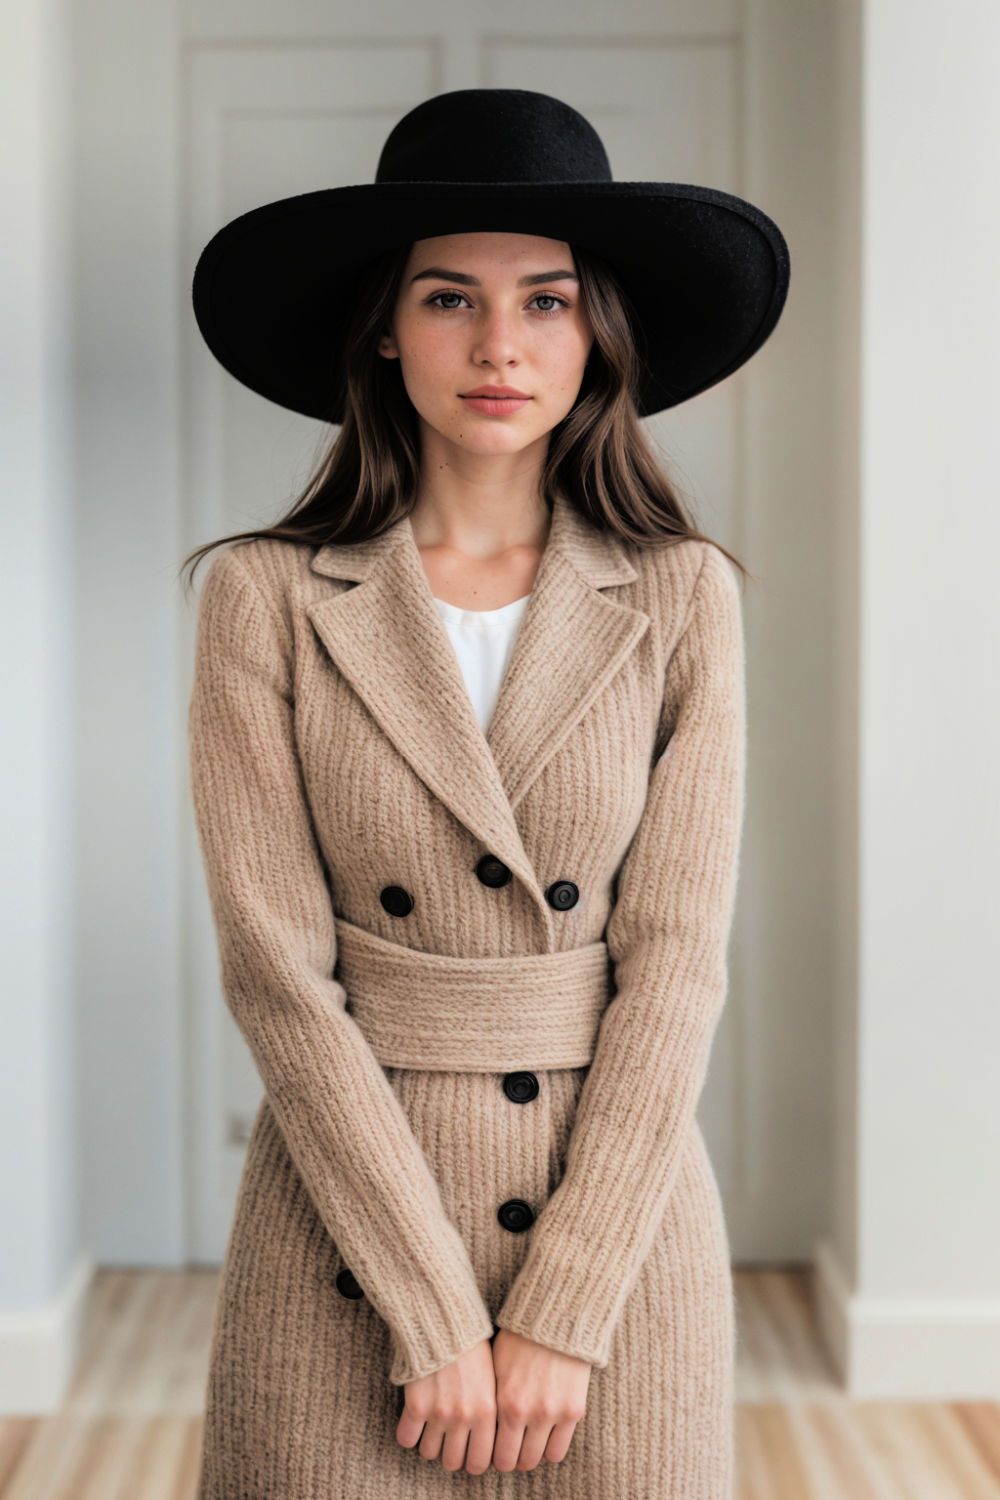 stylish wide brim hat for fall outfit